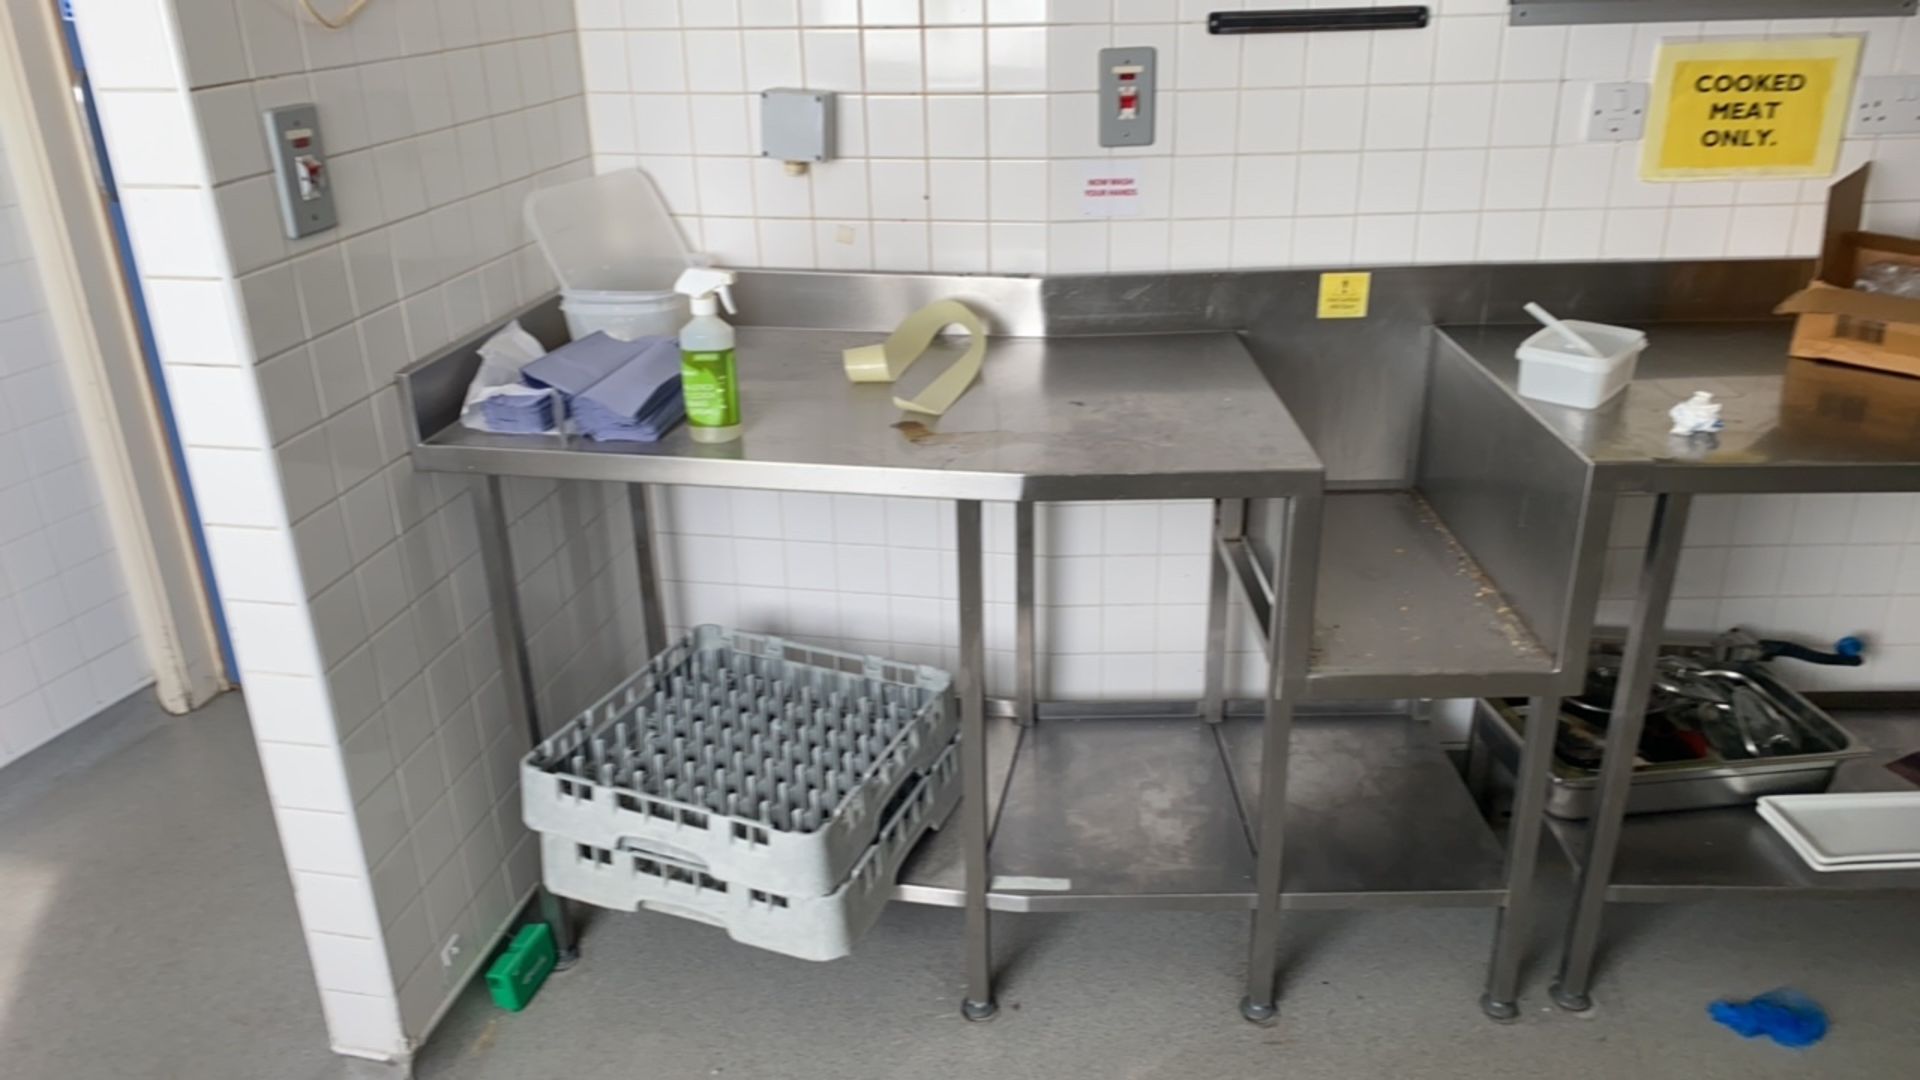 Large Bespoke Stainless Steel Preparation Table With Single Sink Unit And Storage - Image 2 of 4